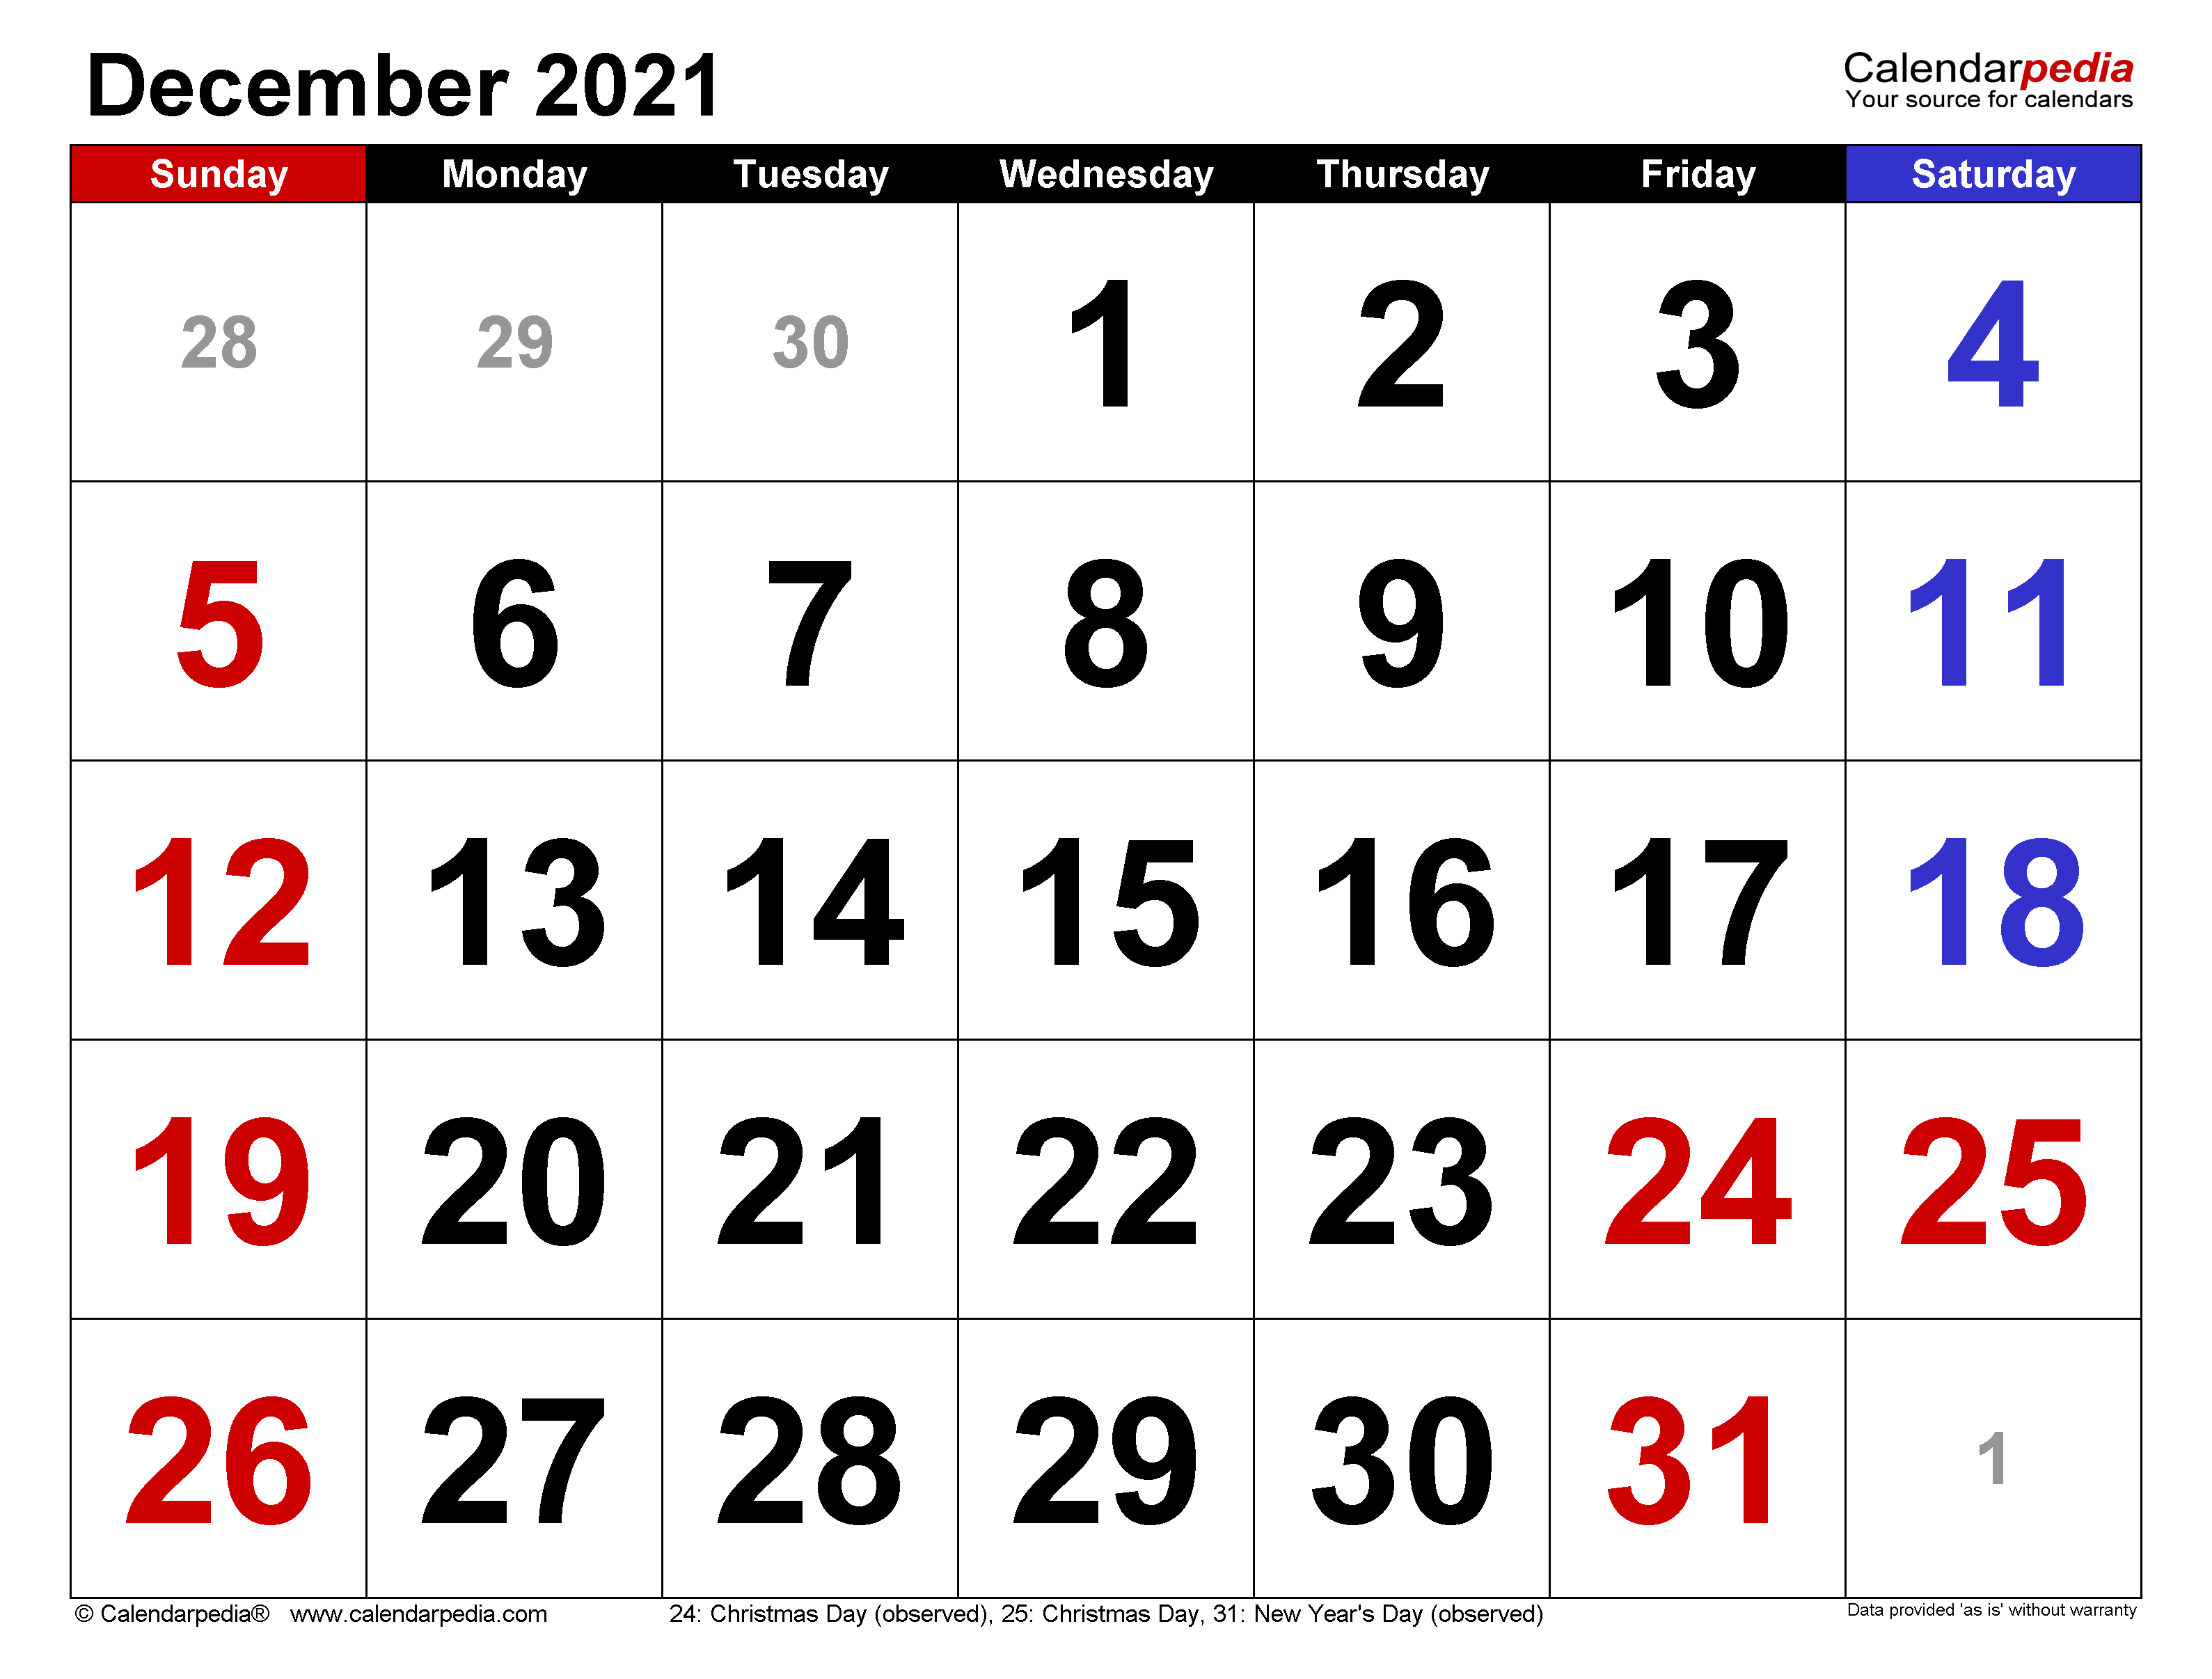 December 2021 Calendar | Templates for Word, Excel and PDF